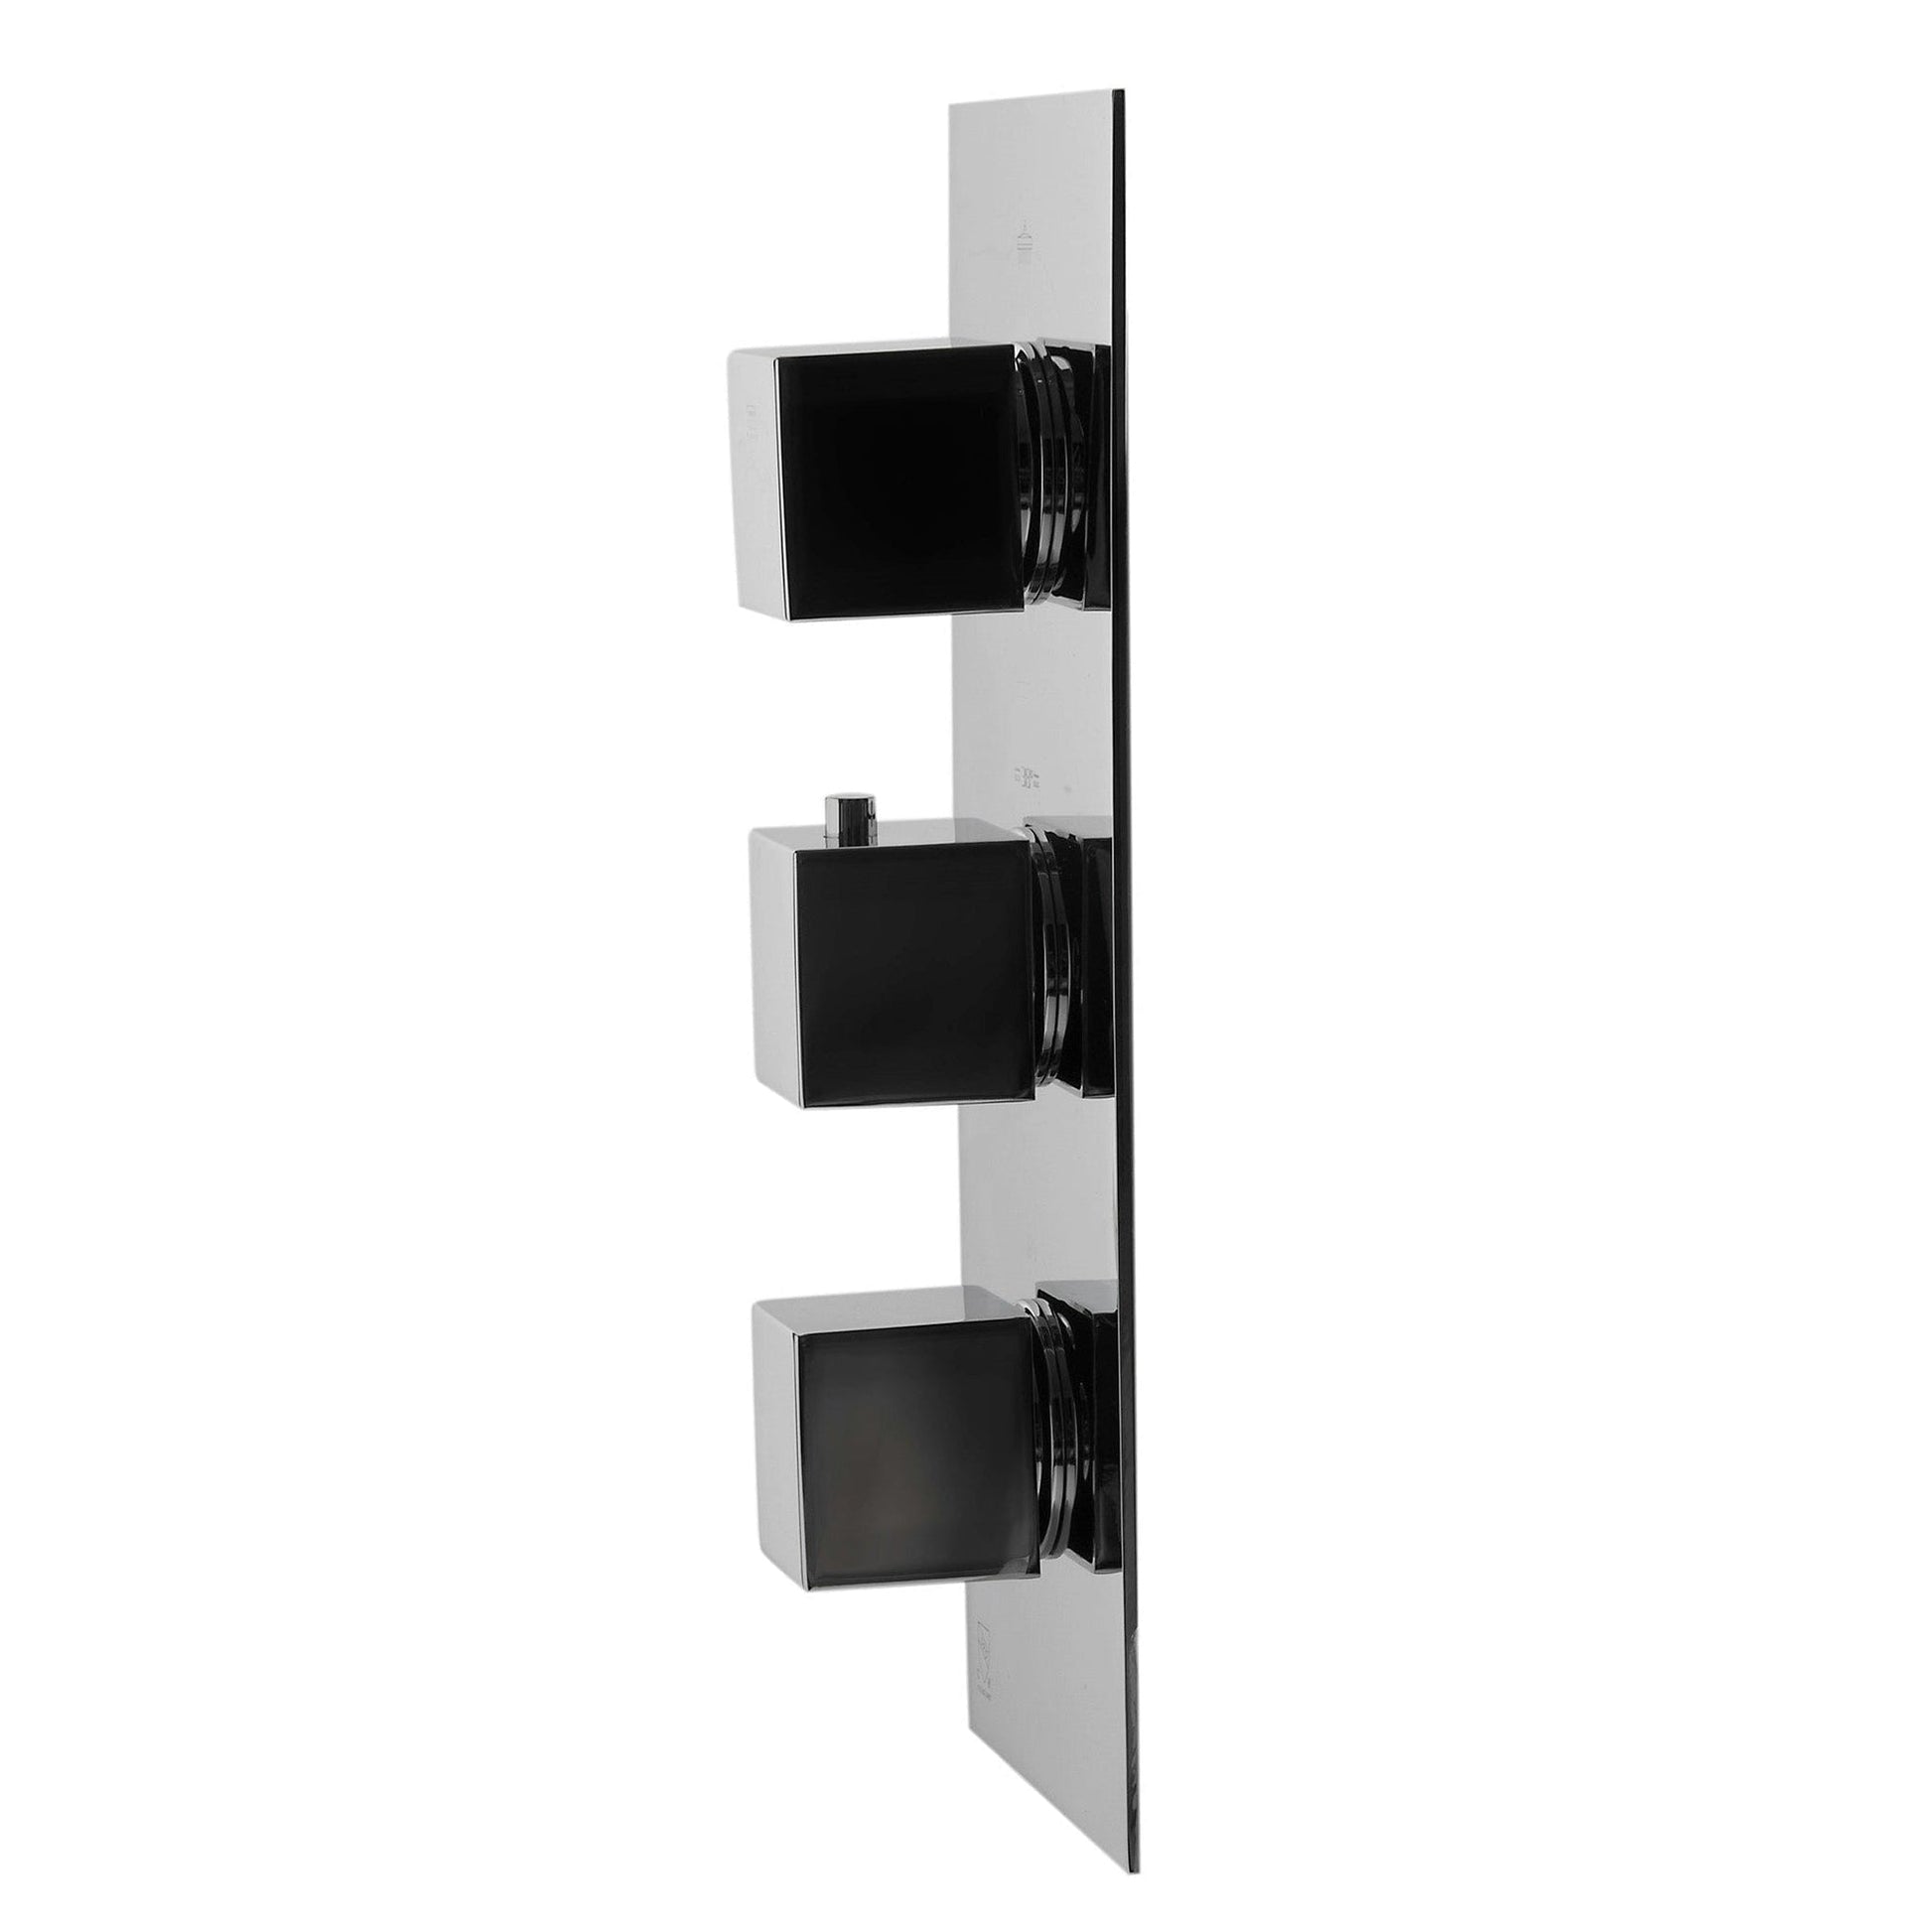 ALFI Brand AB2901-PC Rectangle Polished Chrome Concealed 4-Way Thermostatic Valve Shower Mixer With Square Knobs